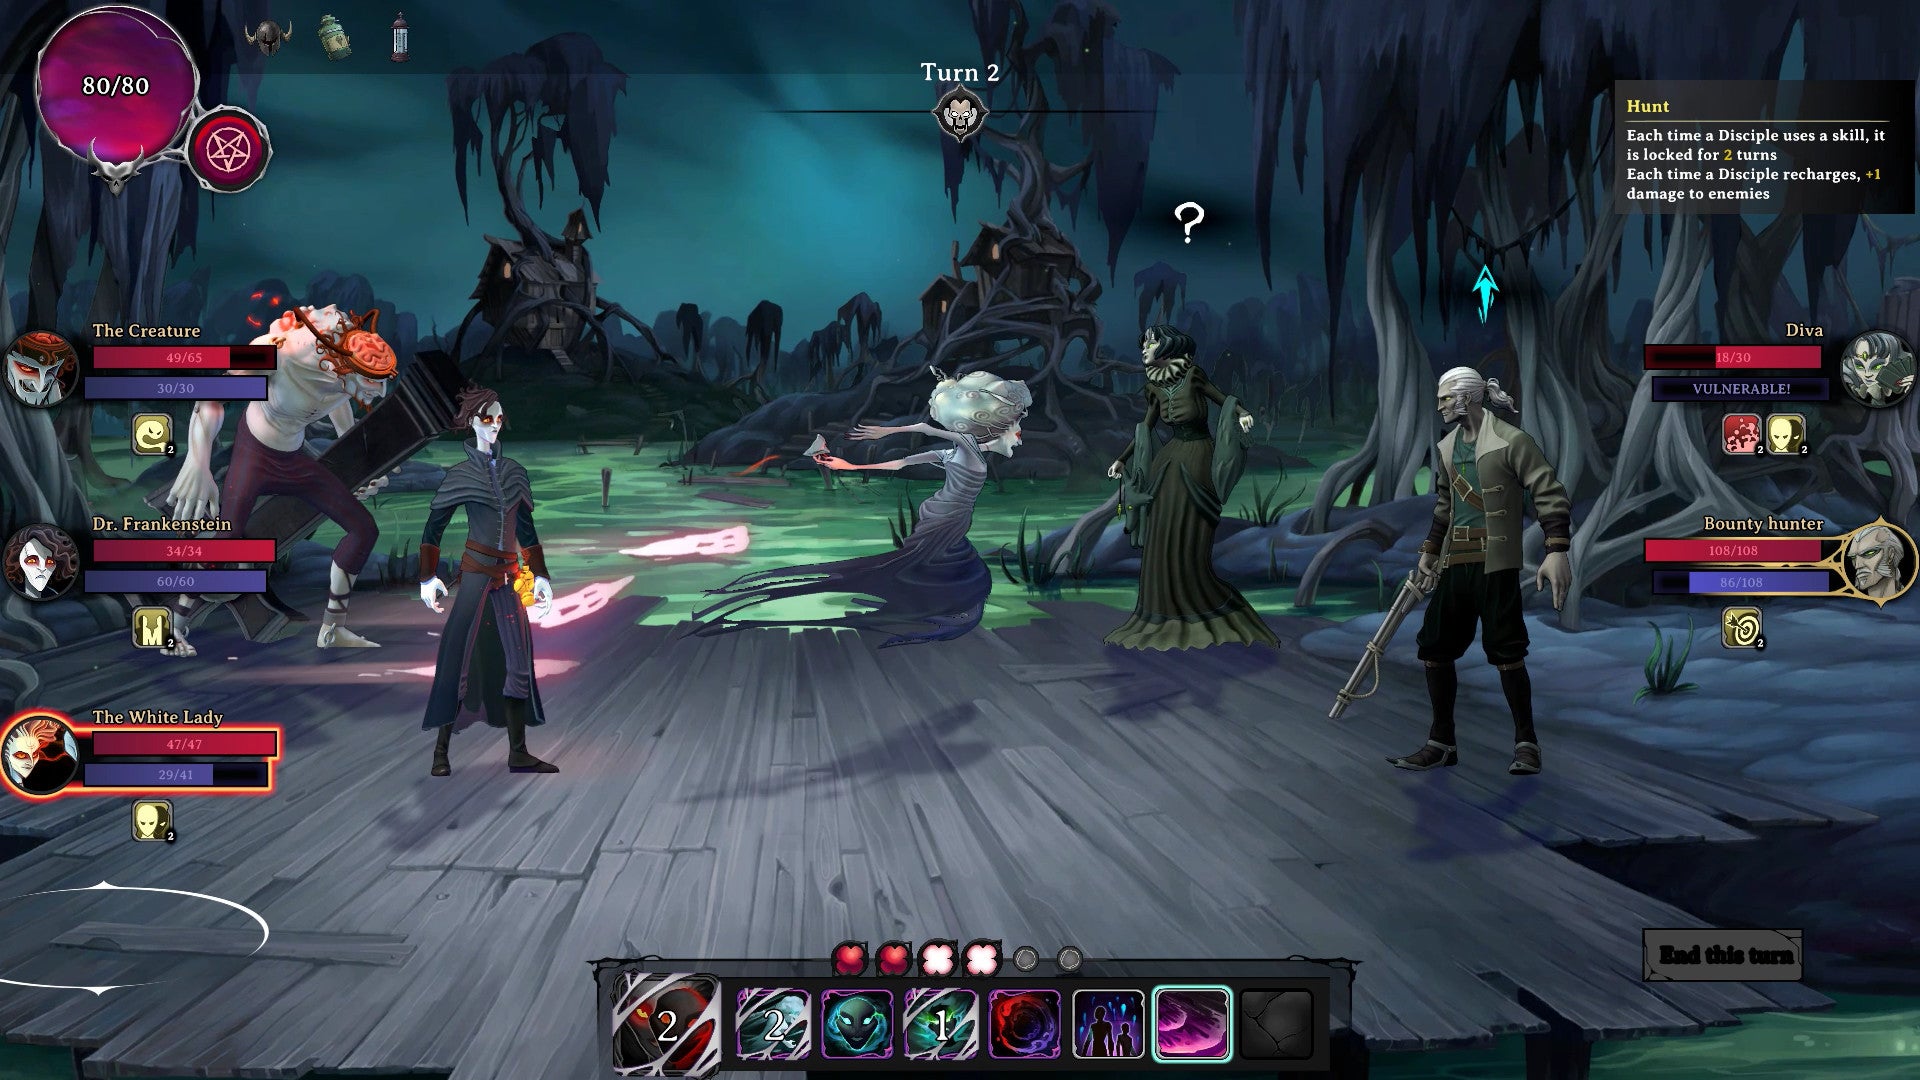 A combat screen from Rogue Lords. The White Lady is launching one of her spirit attacks on a bounty hunter.